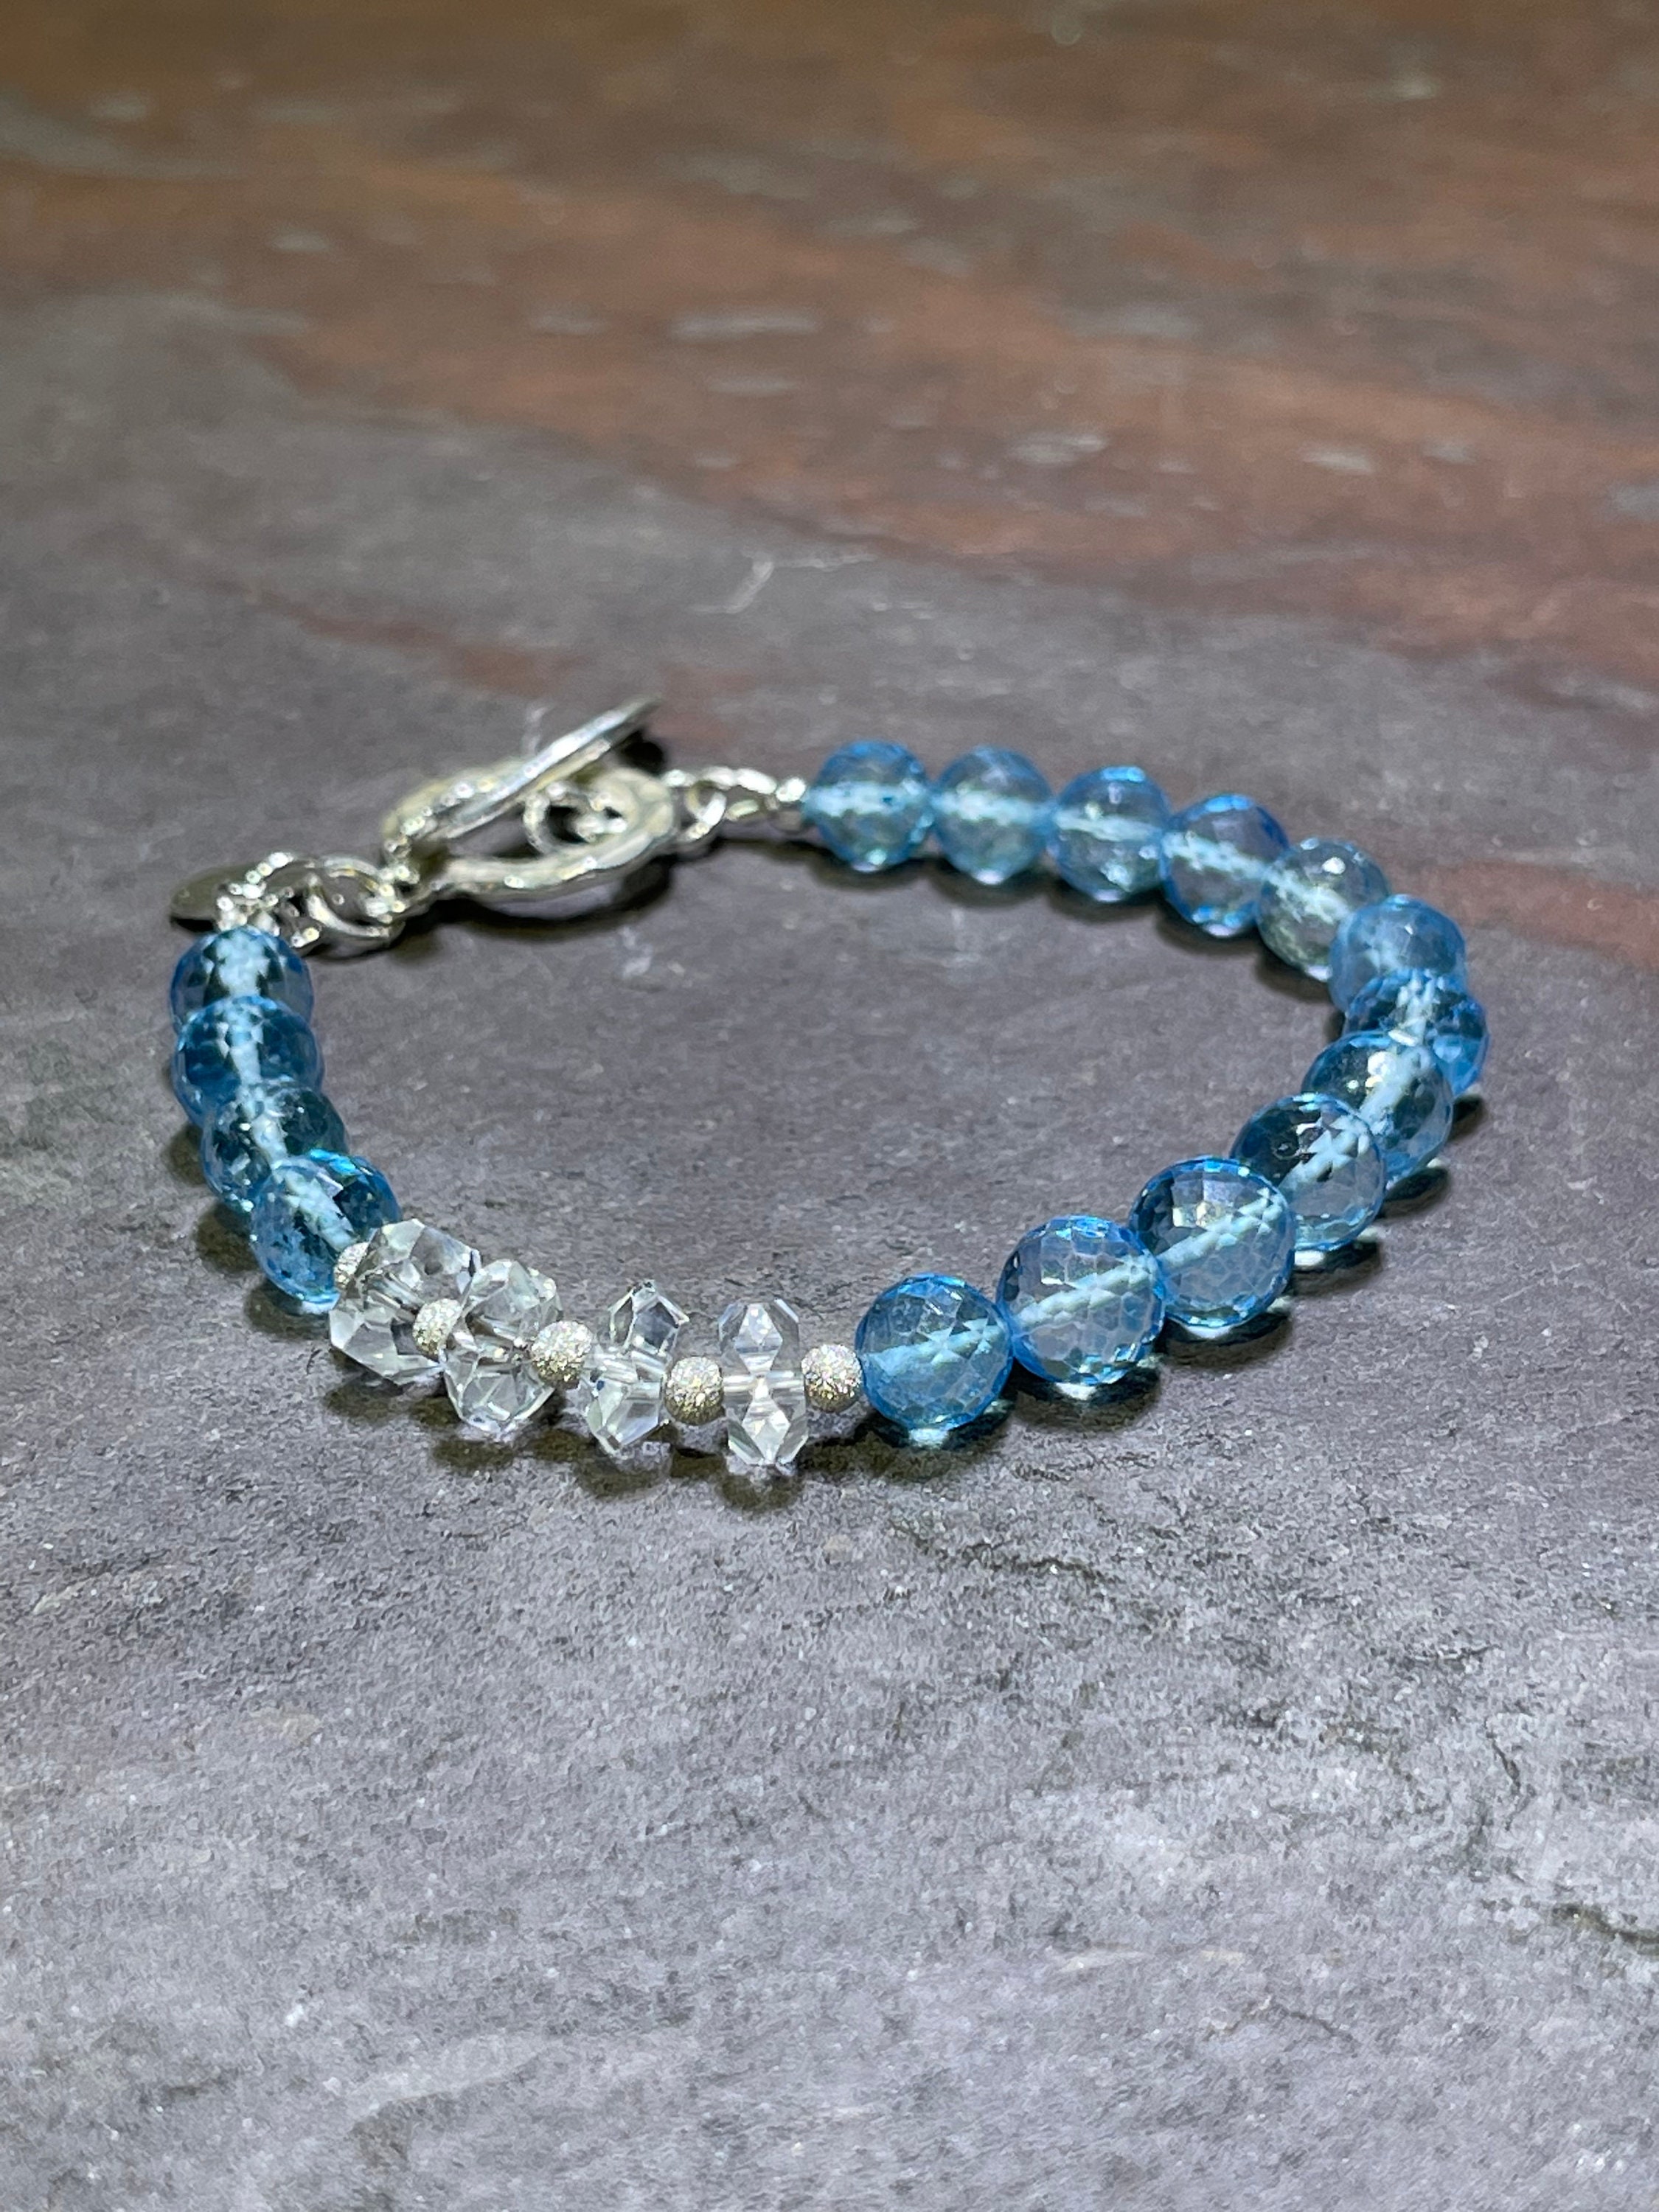 Buy Blue Topaz Quartz Crystal Bracelet. This is Truly A Beautiful Bracelet.  December Birthstone Great Gift for Any Lady That Wears Blue Online in India  - Etsy